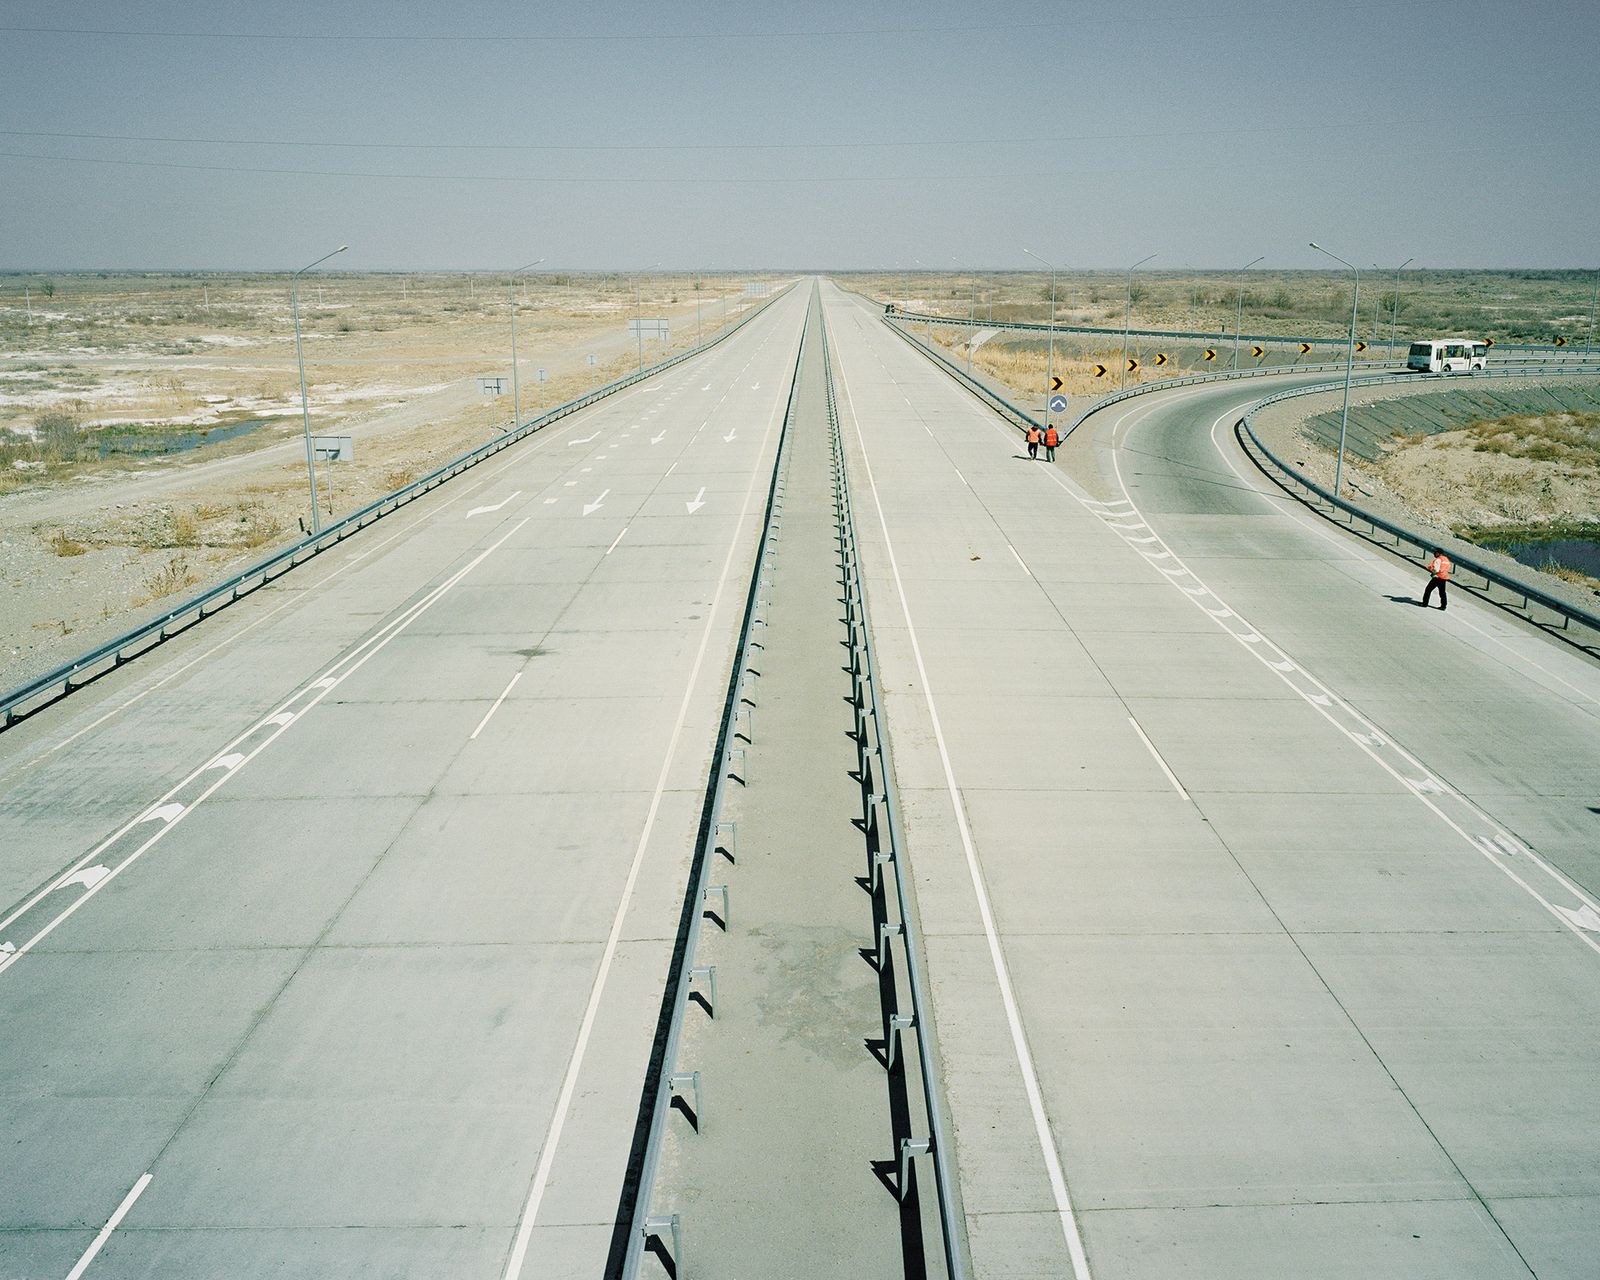 © laurens thys - Highway connecting Kazakhstan with China